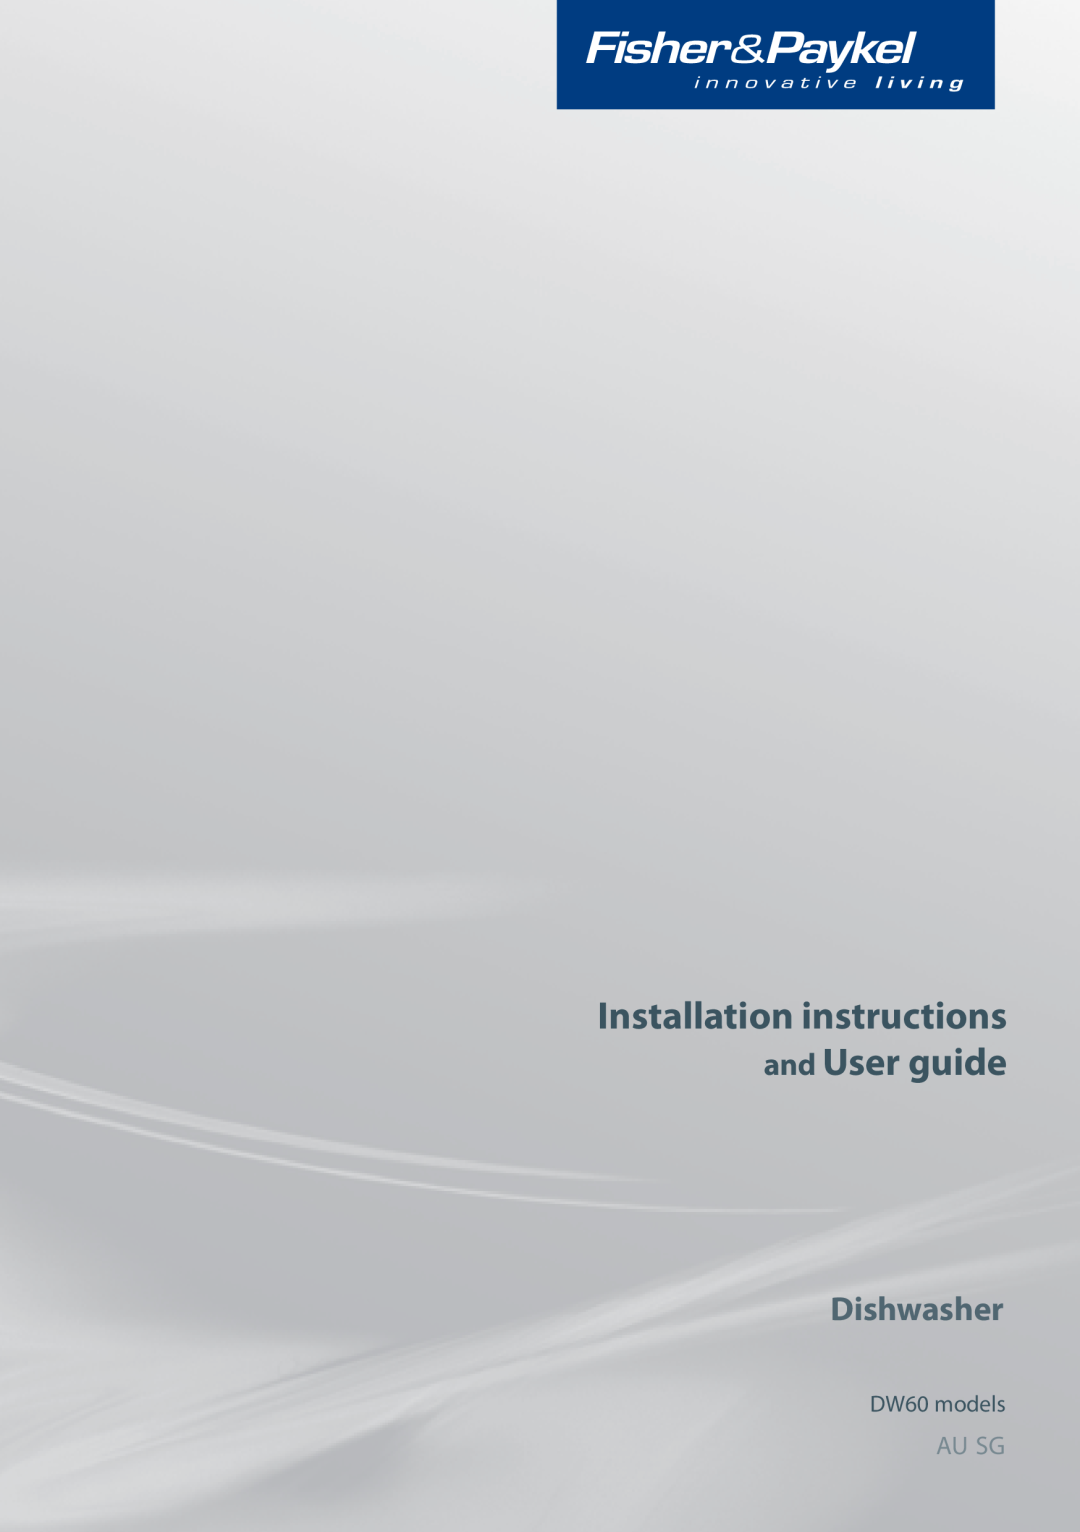 Fisher & Paykel DW60 installation instructions Installation instructions and User guide, Dishwasher, Nz Au Sg 